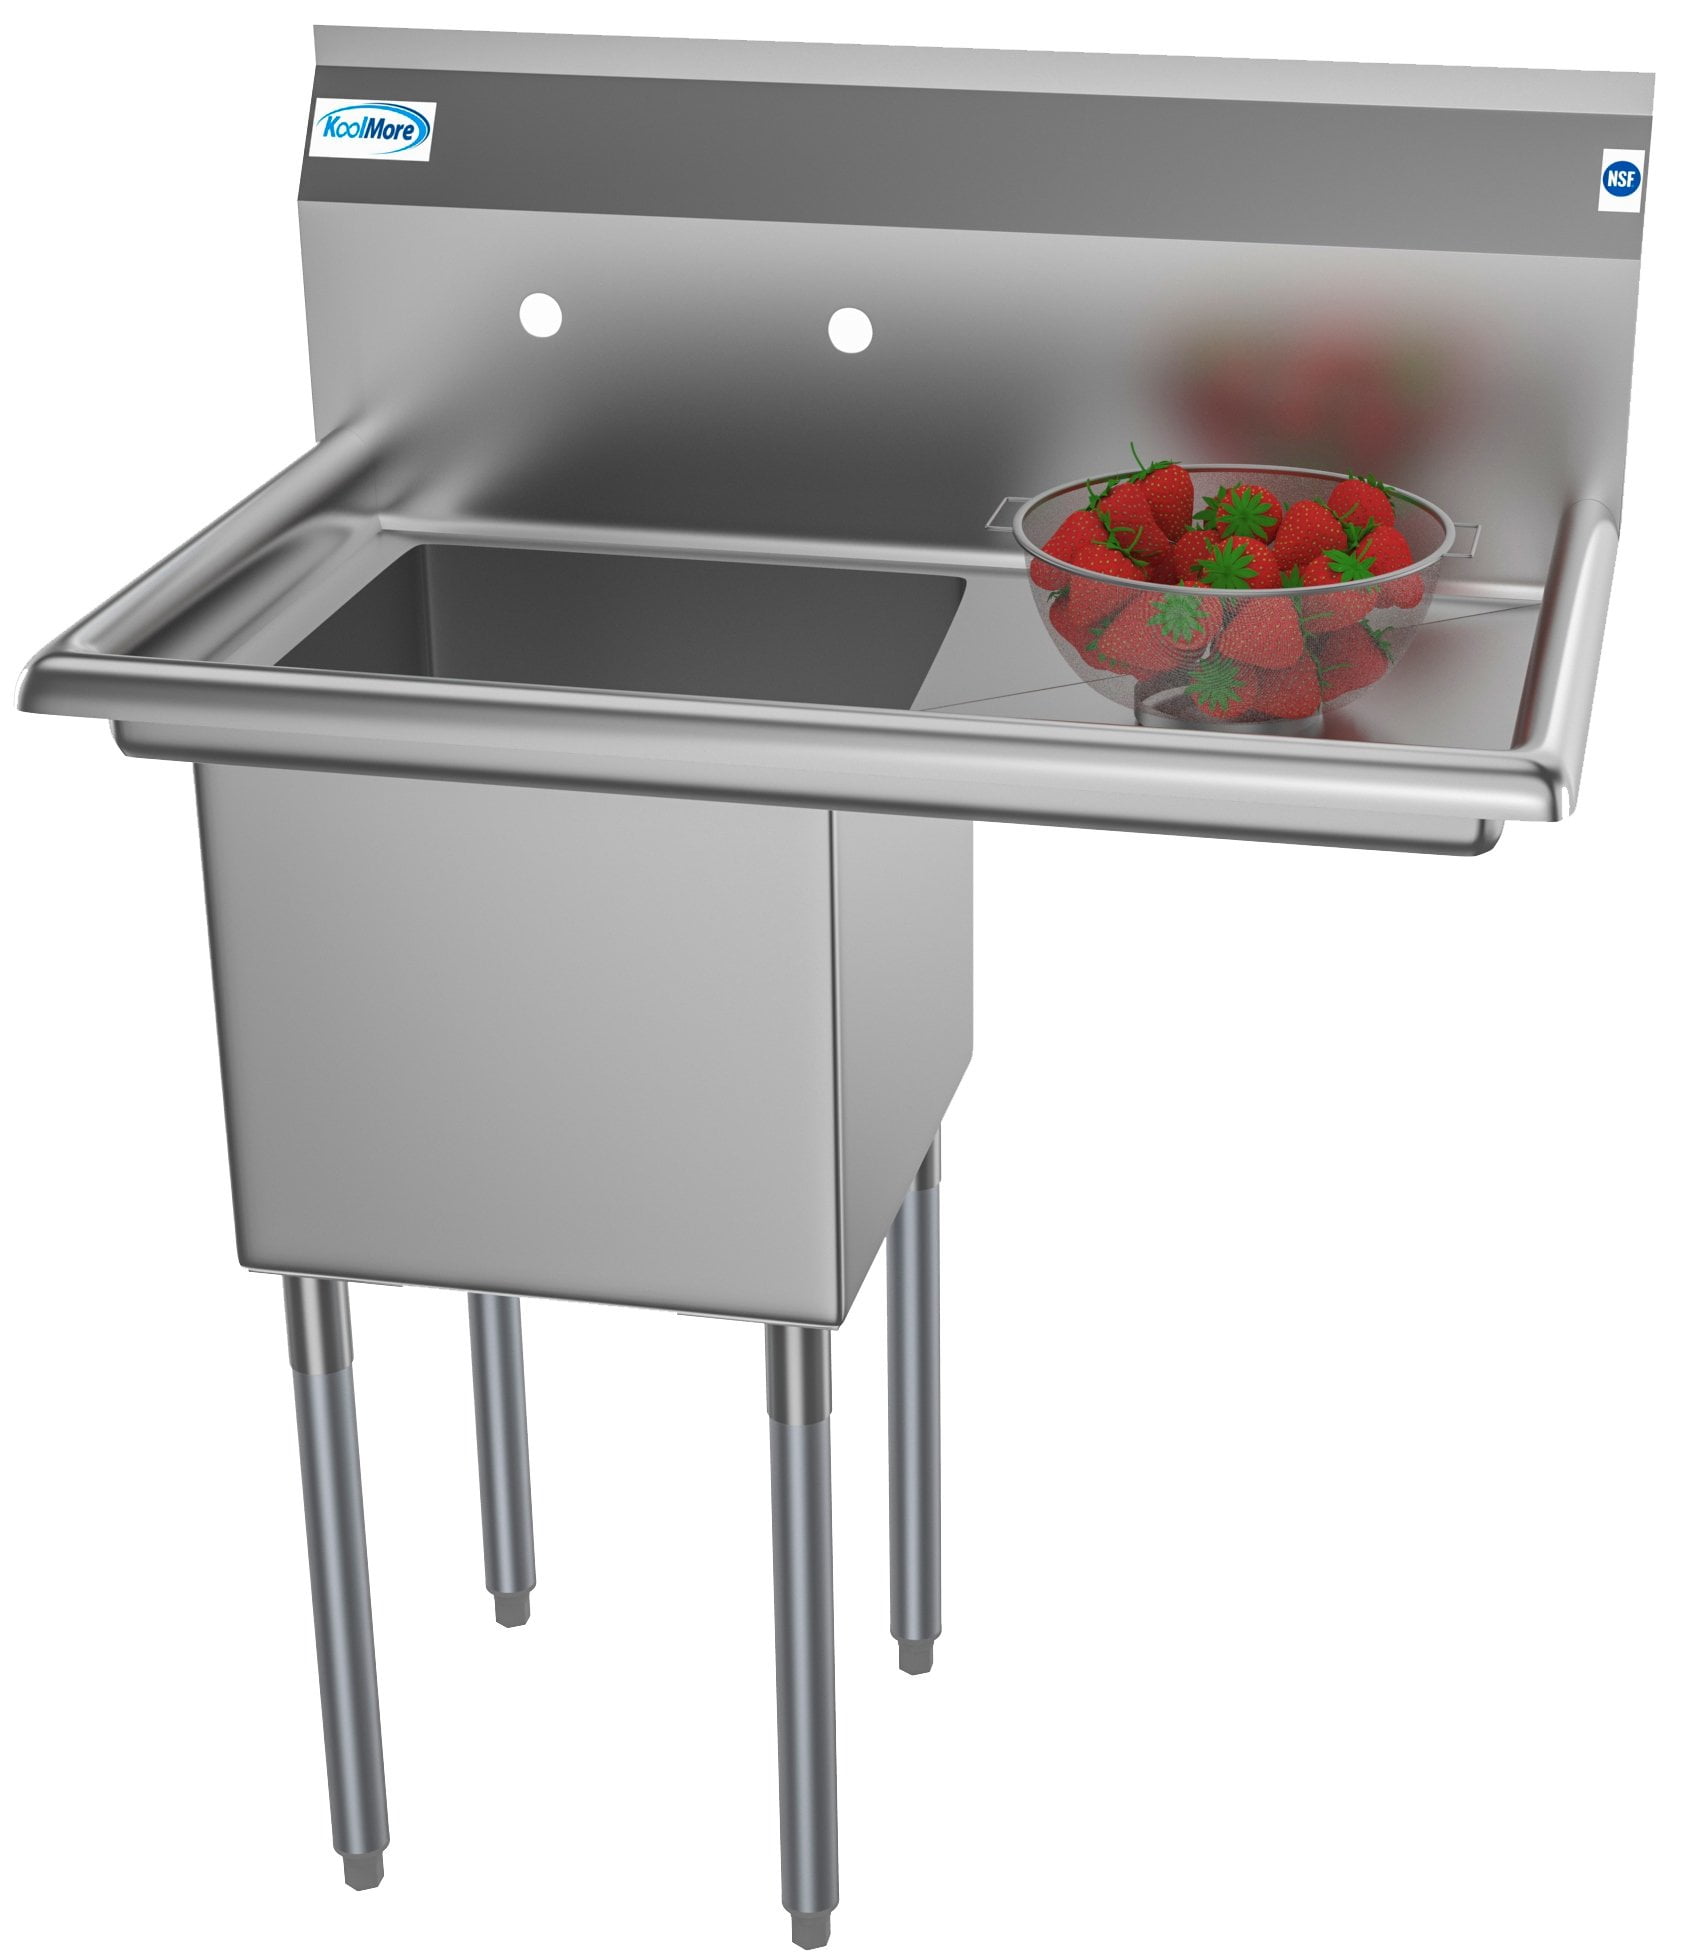 Stainless Steel Utility Sink for Commercial Kitchen 23.5" Wide 